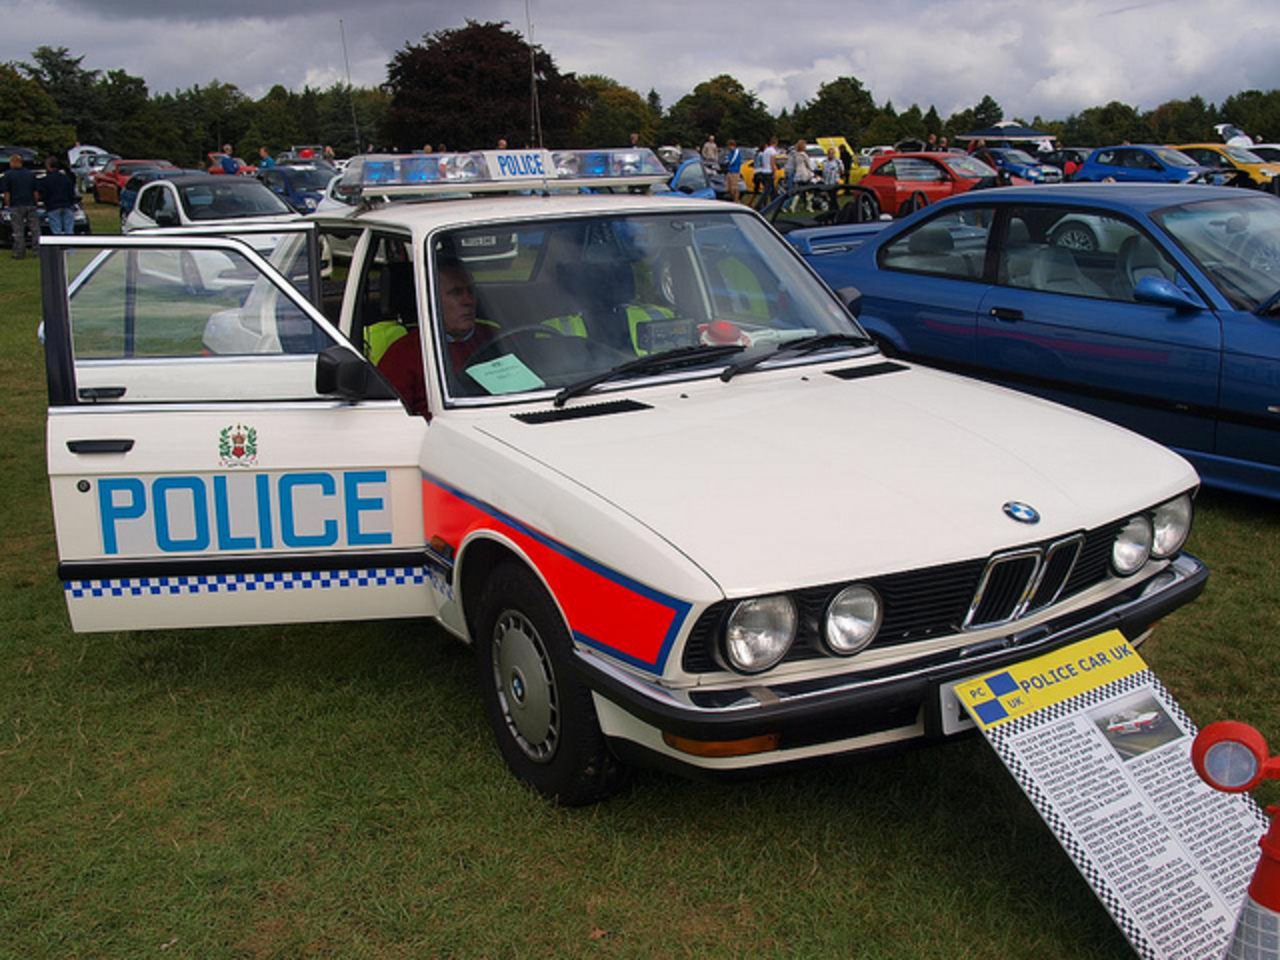 BMW Series 5 E28 Police Cars - 1986 | Flickr - Photo Sharing!